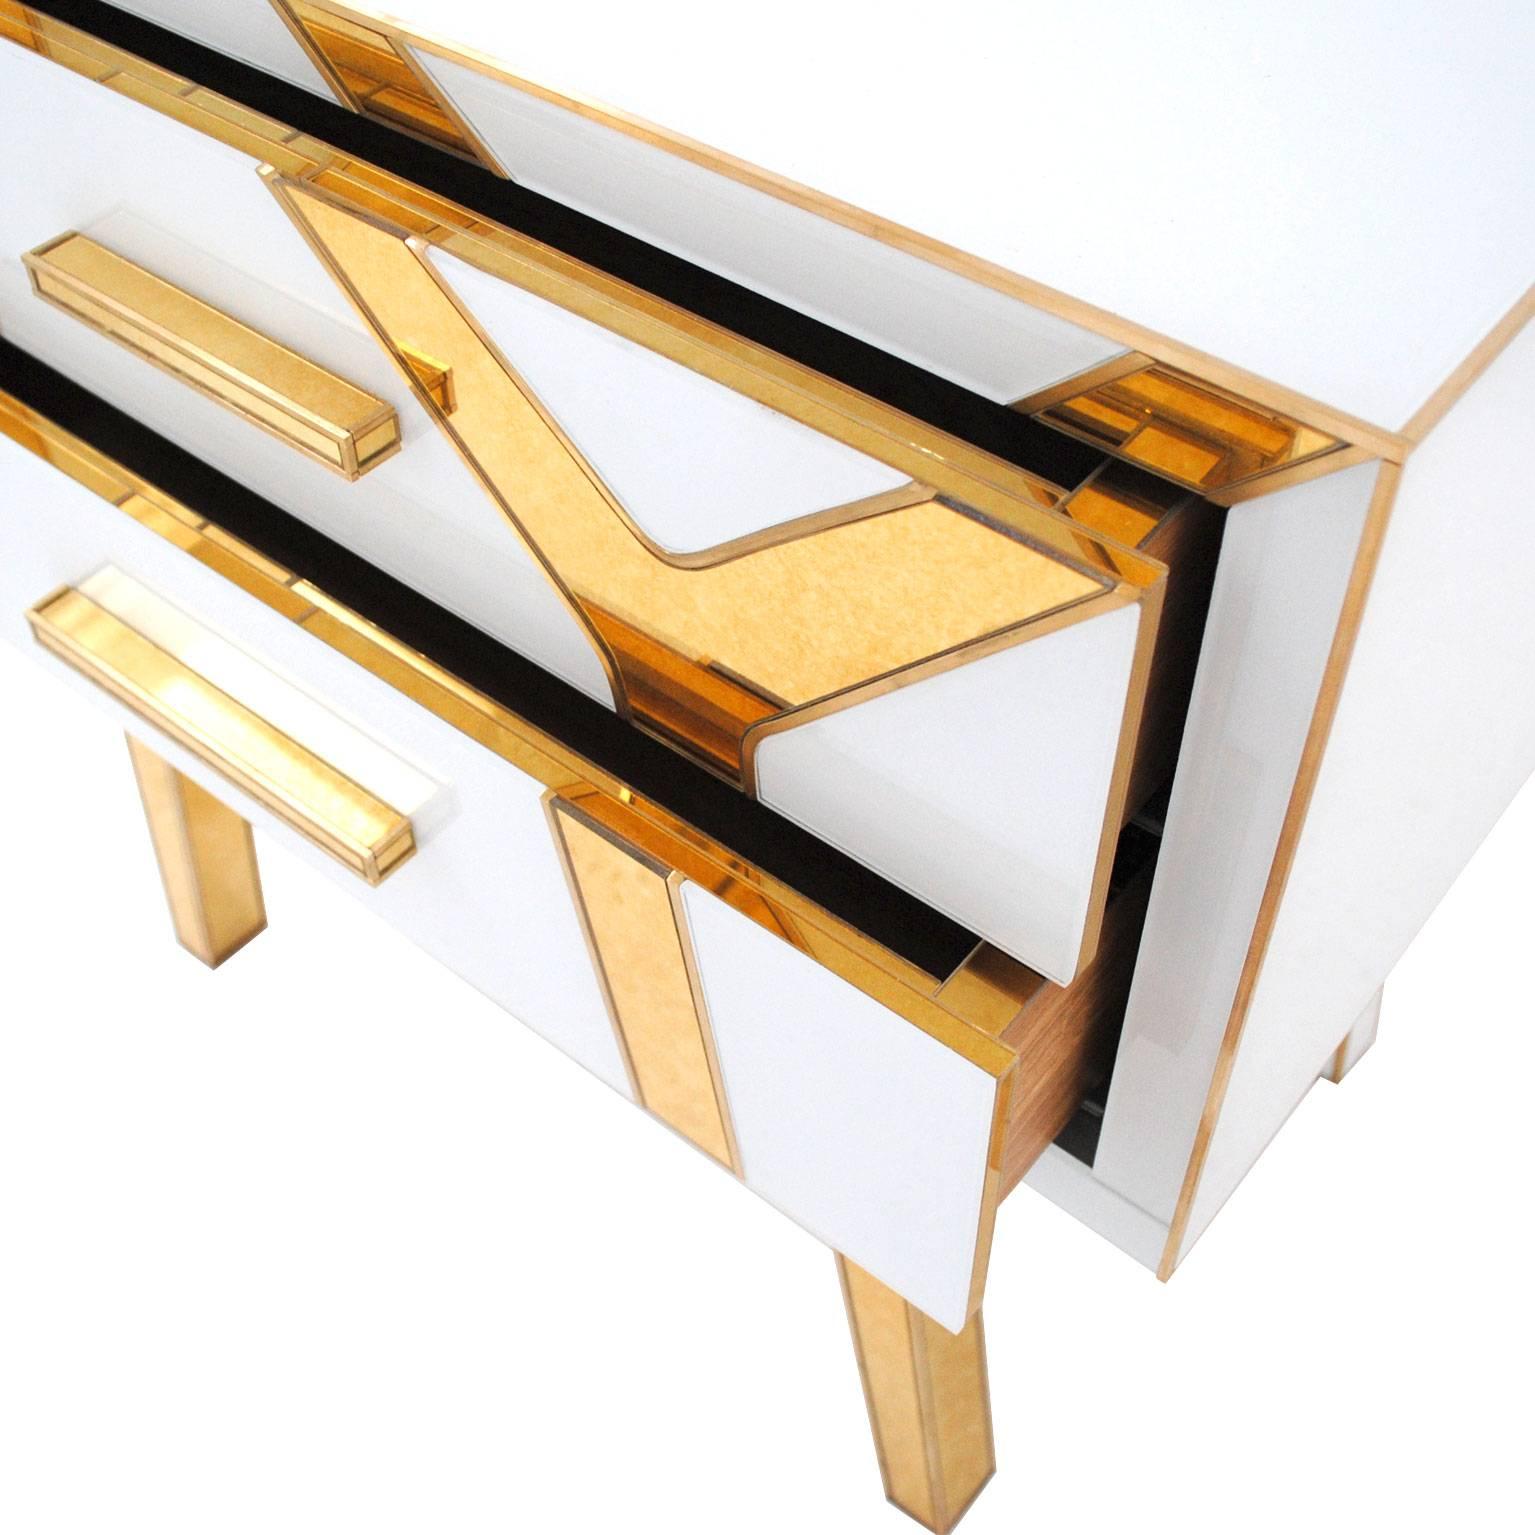 Contemporary Solid Wood and Glass Italian Pair of Bedside Tables by L.A. Studio 1